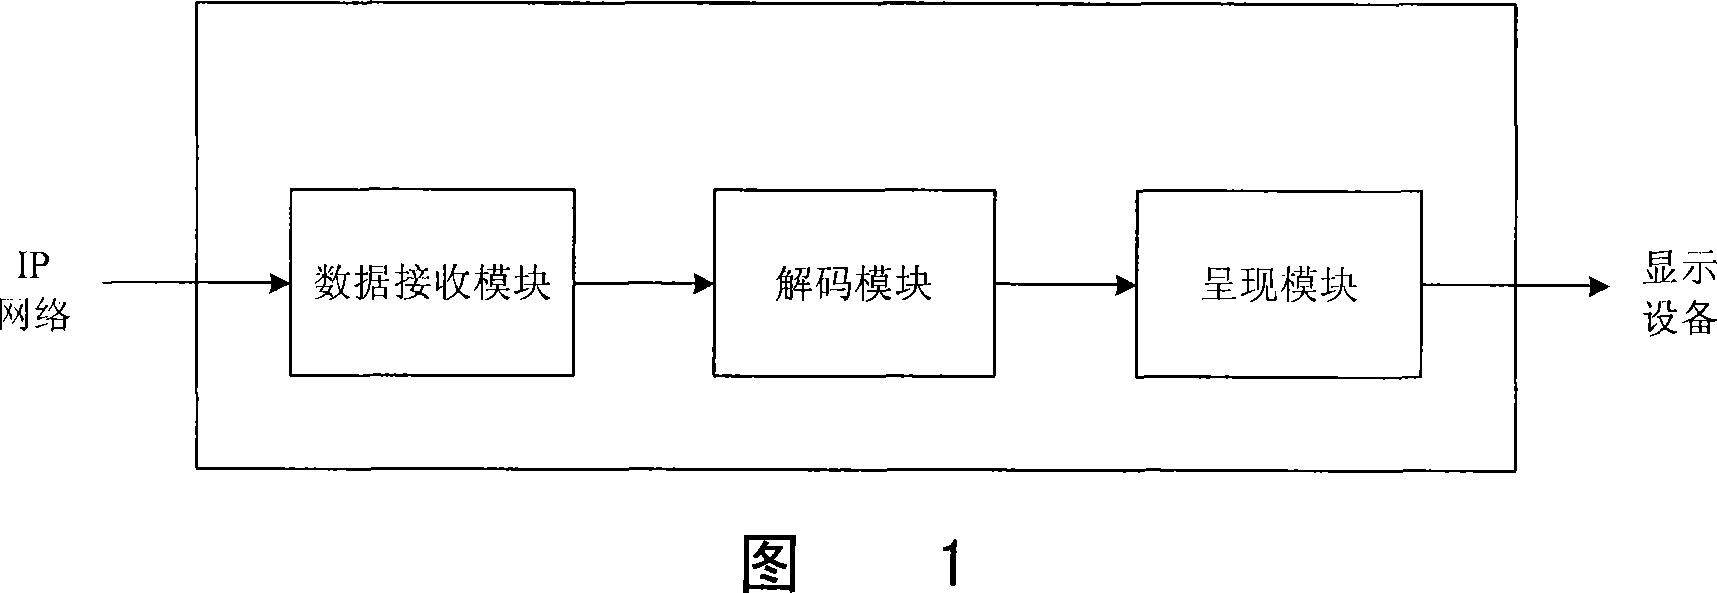 Network flow media player and method for support multi-viewpoint vedio composition